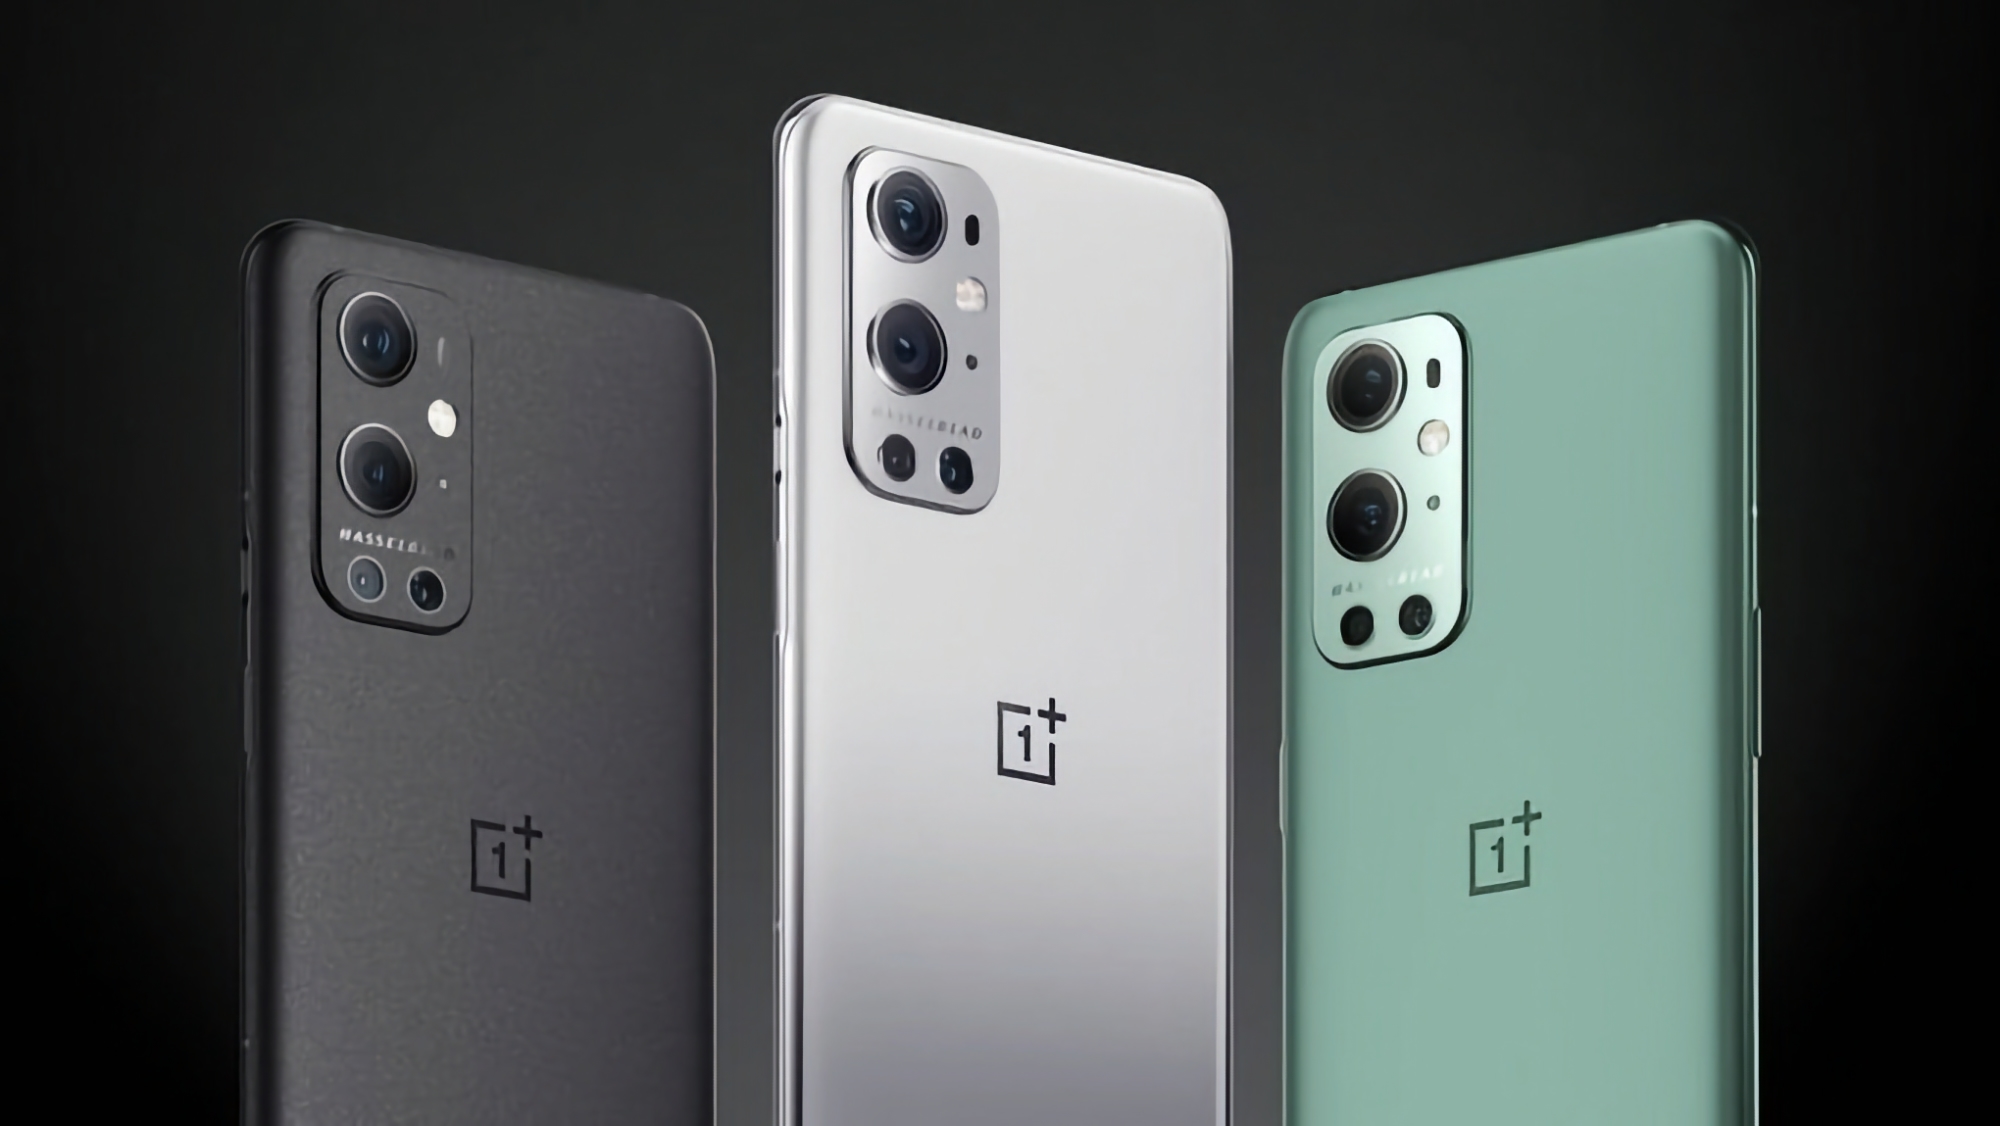 OnePlus 9, OnePlus 9 Pro and OnePlus 9RT have received OxygenOS 14.0.0.212: what's new